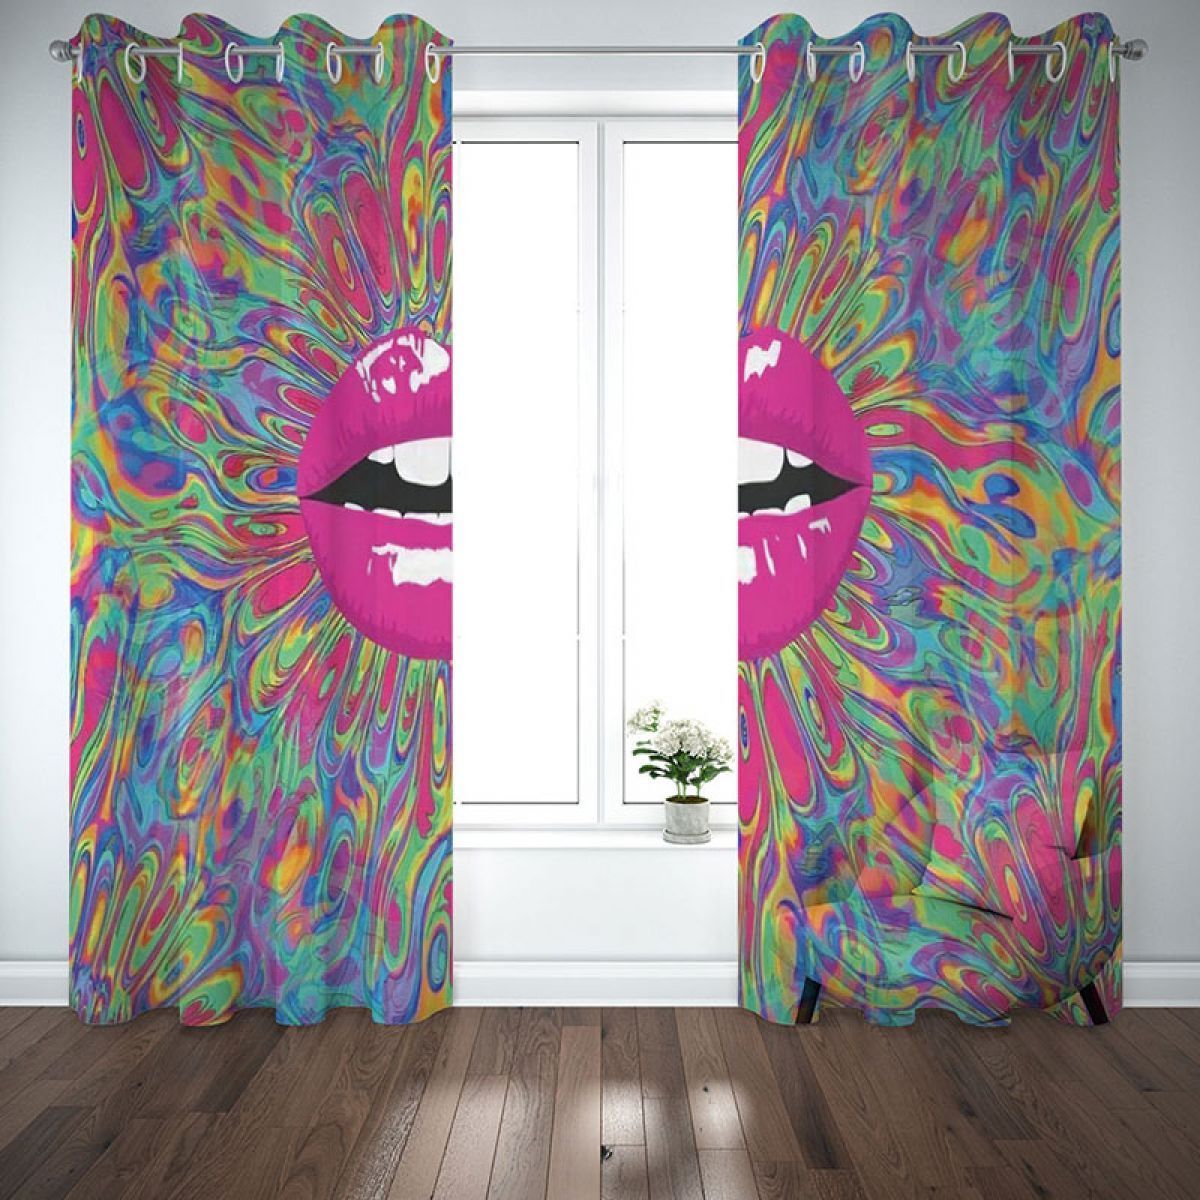 lipstick mouth watercolor printed window curtain home decor 5500